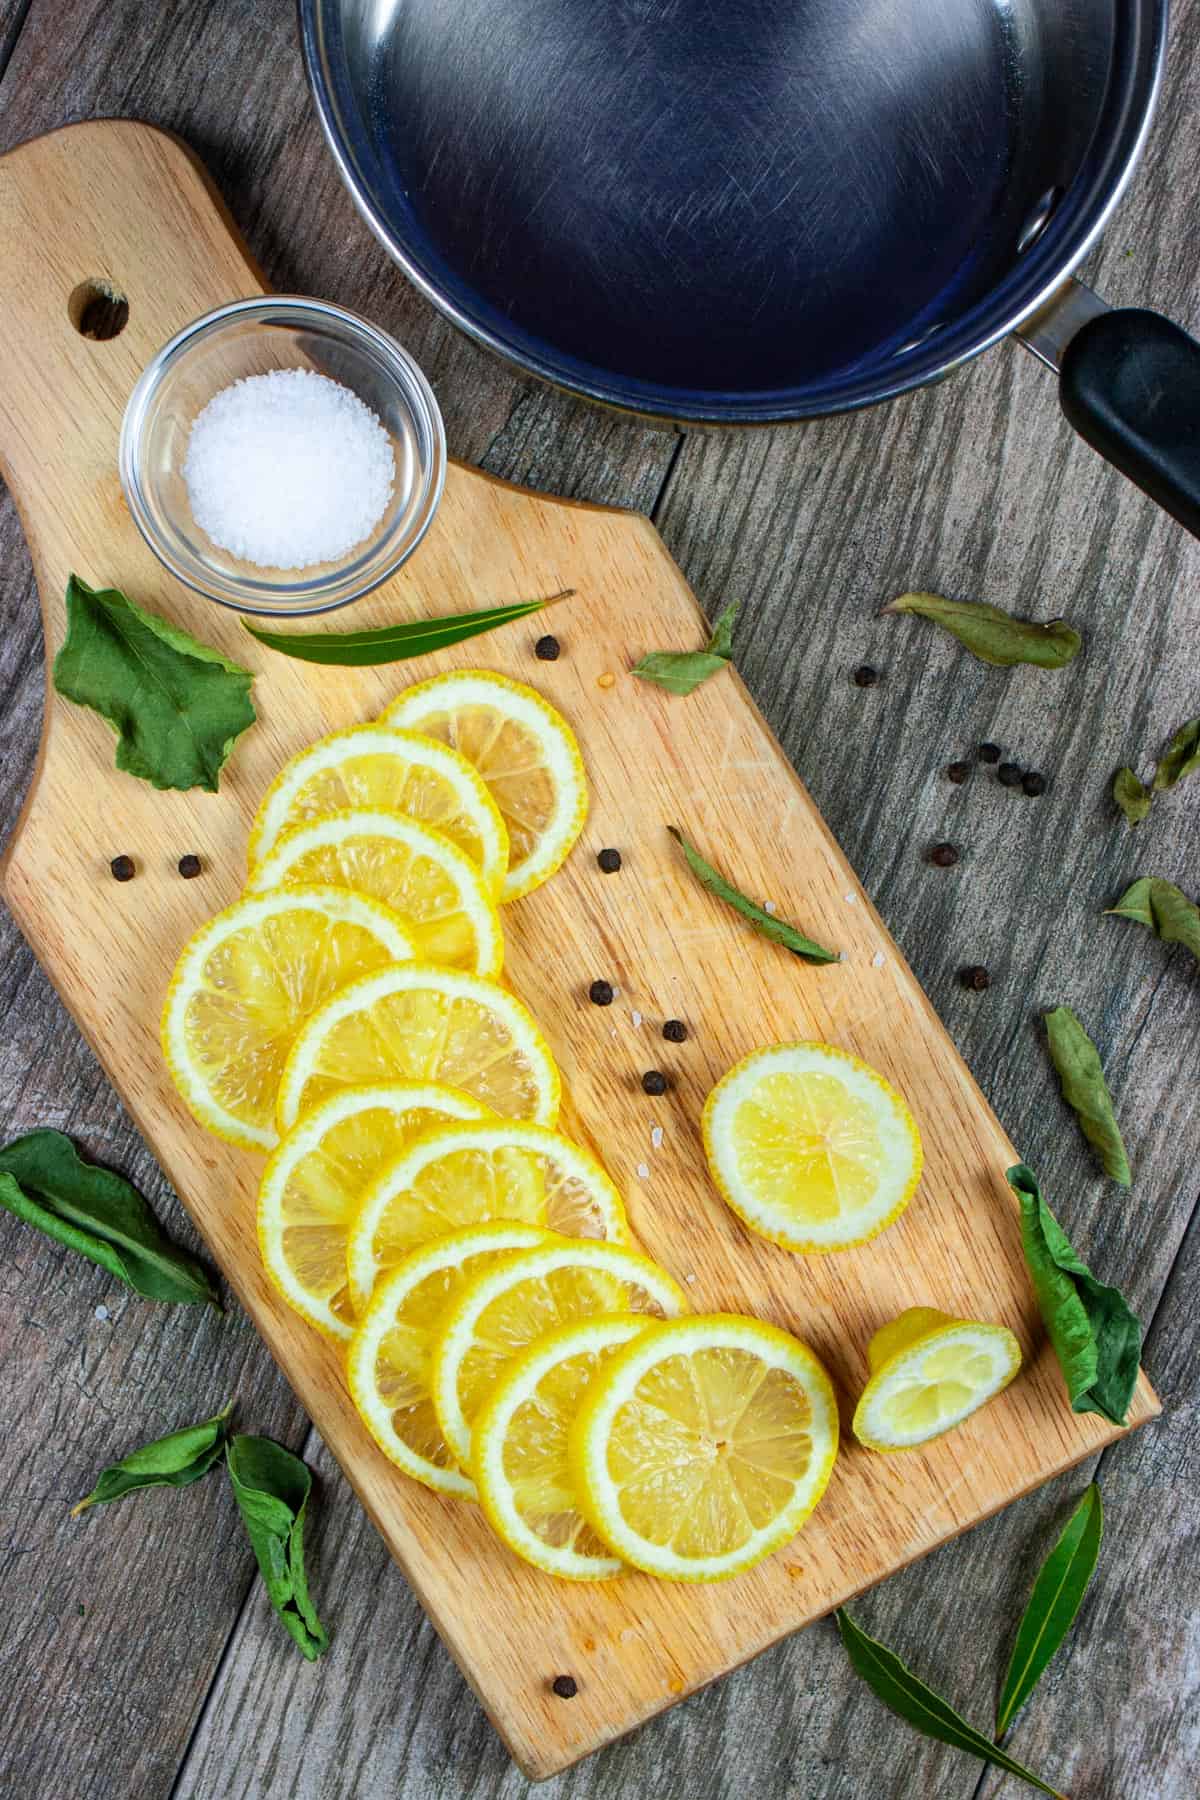 Sliced fresh lemon on a board with peppercorns and spices, some salt in a ramekin, all on a grey wood counter with a sauce pan next to it.